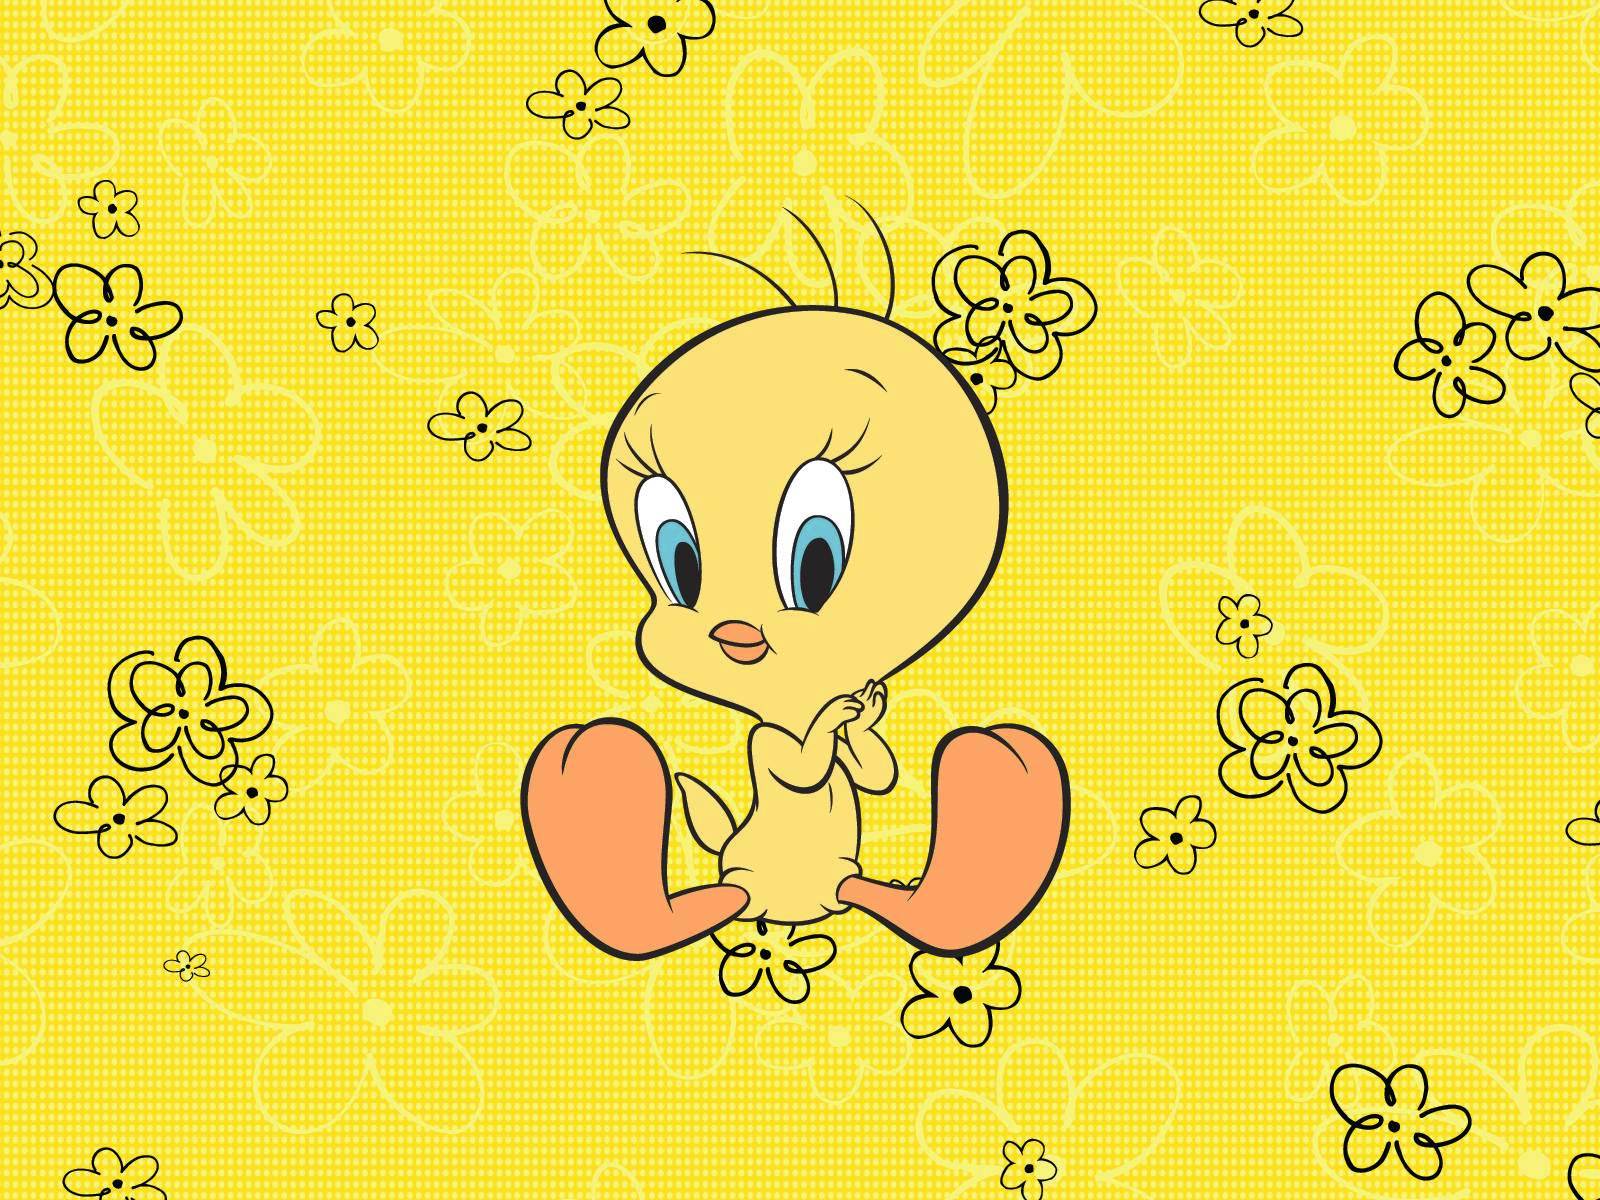 free-download-tweety-bird-wallpaper-free-more-30-pic-it-s-a-absolutelly